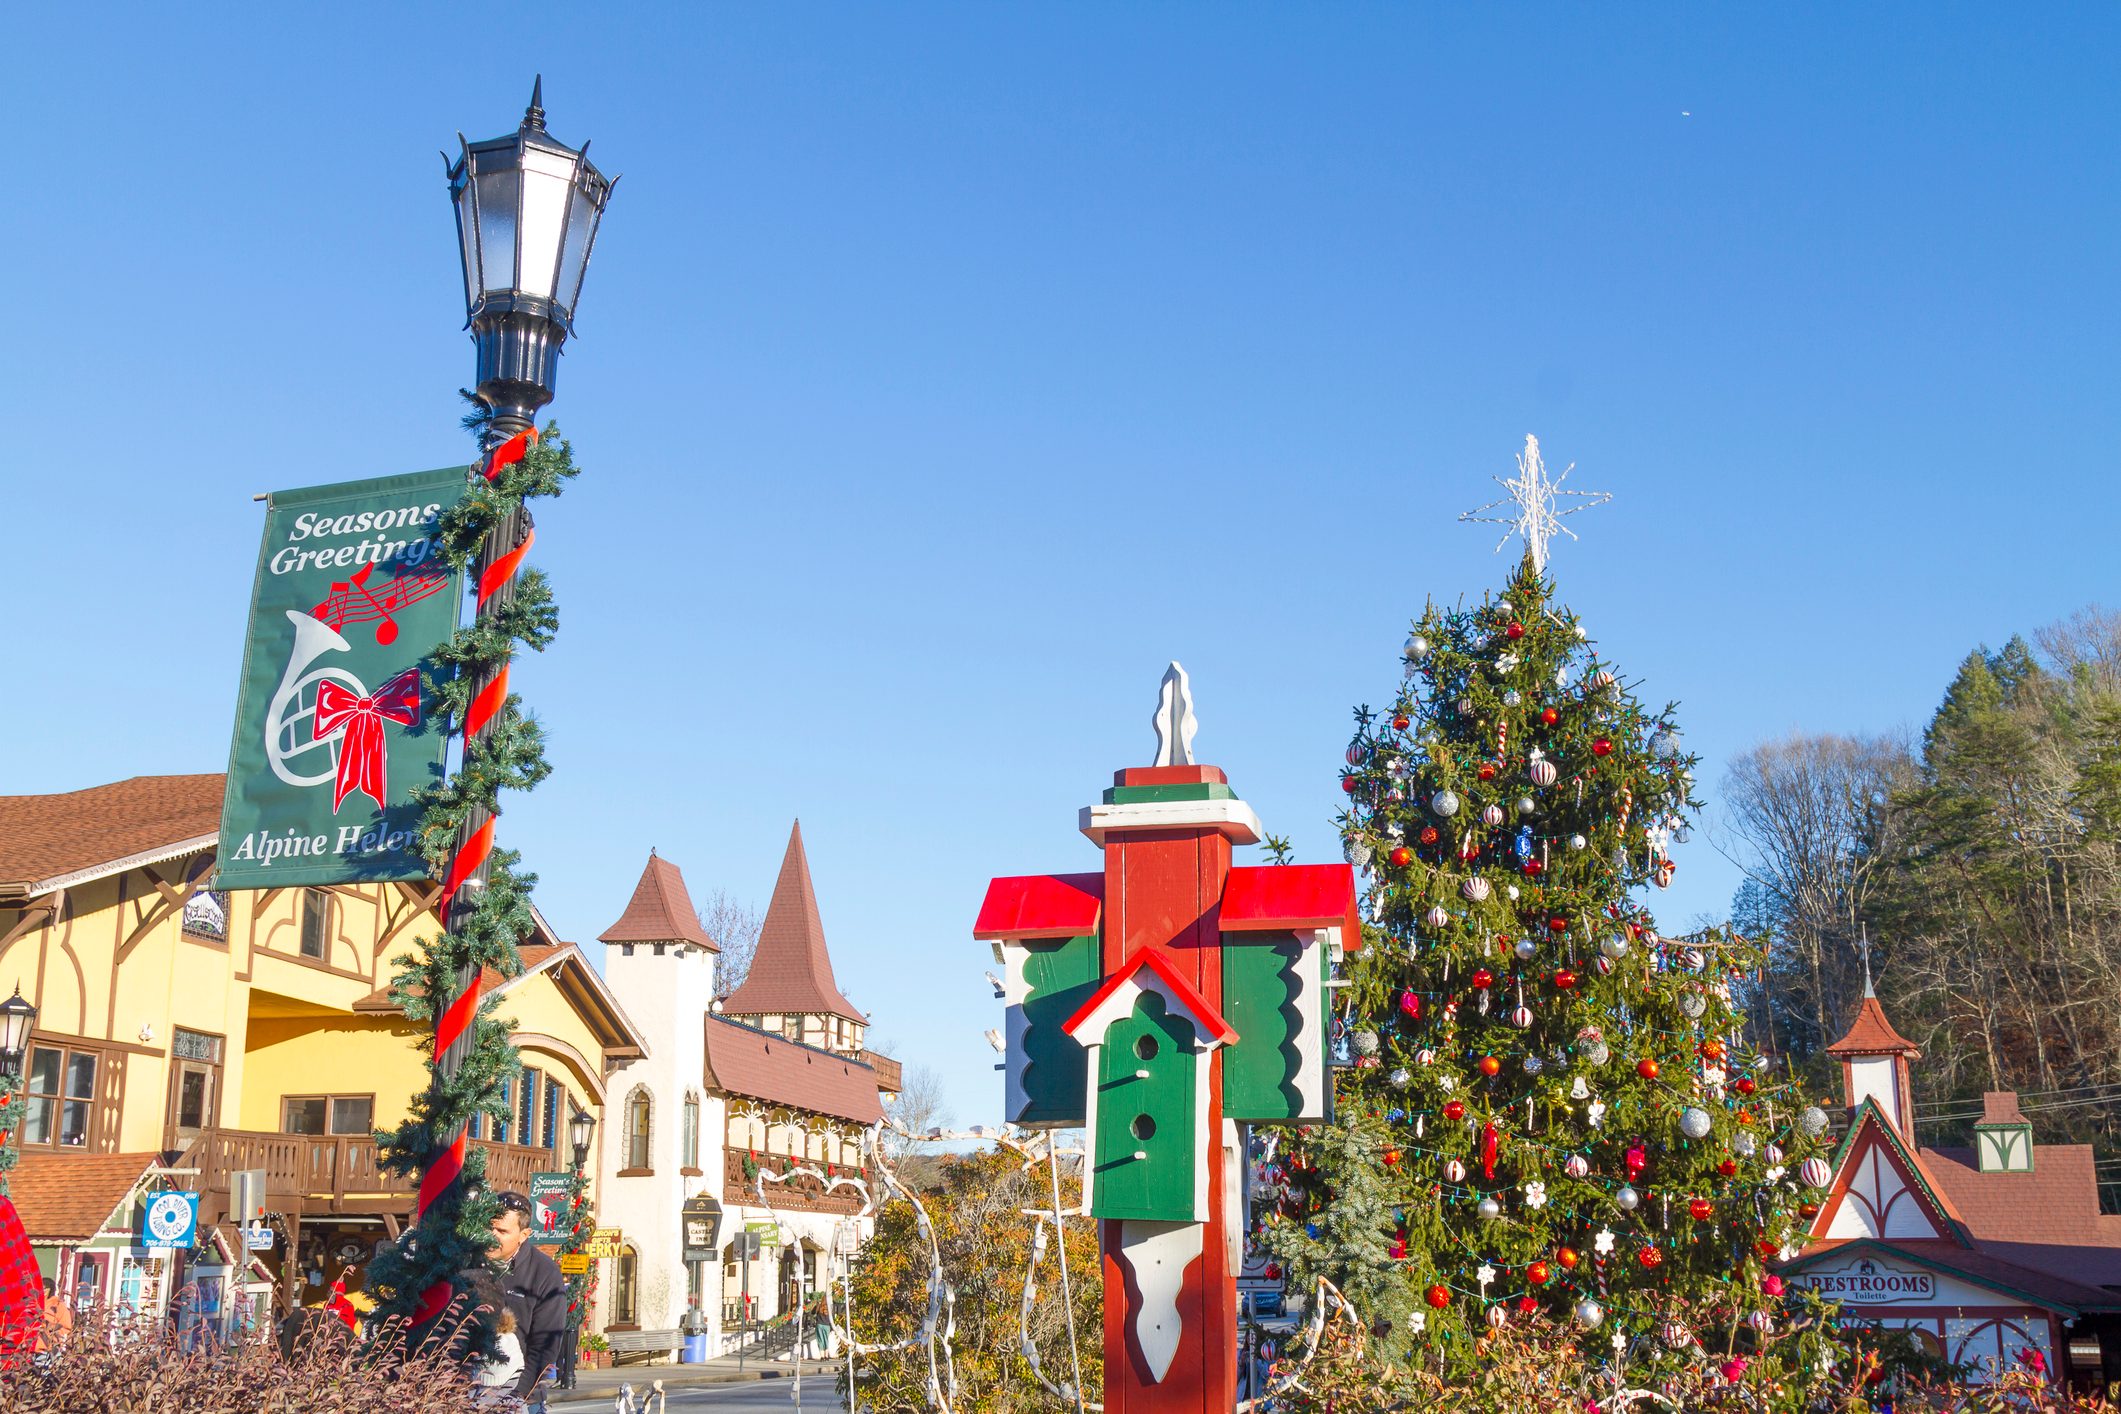 <p><strong>Best for:</strong> A Bavarian Christmas</p> <p>Pretend you're in the Alps instead of the Blue Ridge Mountains in this adorable German-influenced Christmas town, one of the most picturesque <a href="https://www.rd.com/list/most-european-cities-in-america/">small American towns you'd swear were from Europe</a>. As if it doesn't look storybook enough, in December it becomes a holiday paradise with its Christkindlmarkt, or Christmas market, with unique gifts, decorations, yummy food, drinks, and candied treats. Plus, the annual lighting of the village has Santa and Mrs. Claus arriving on a Bavarian sleigh to greet children as the town is lit up, plus musical performances.</p> <p>The quirky Heidi Motel is one of the only places in the country you can stay in a windmill! With recently updated rooms, in-room jacuzzis, and close to the center of town, this motel will make for a memorable stay.</p> <p class="listicle-page__cta-button-shop"><a class="shop-btn" href="https://www.tripadvisor.com/Hotel_Review-g35004-d610539-Reviews-or10-Heidi_Motel-Helen_Georgia.html#REVIEWS">Book Now</a></p>